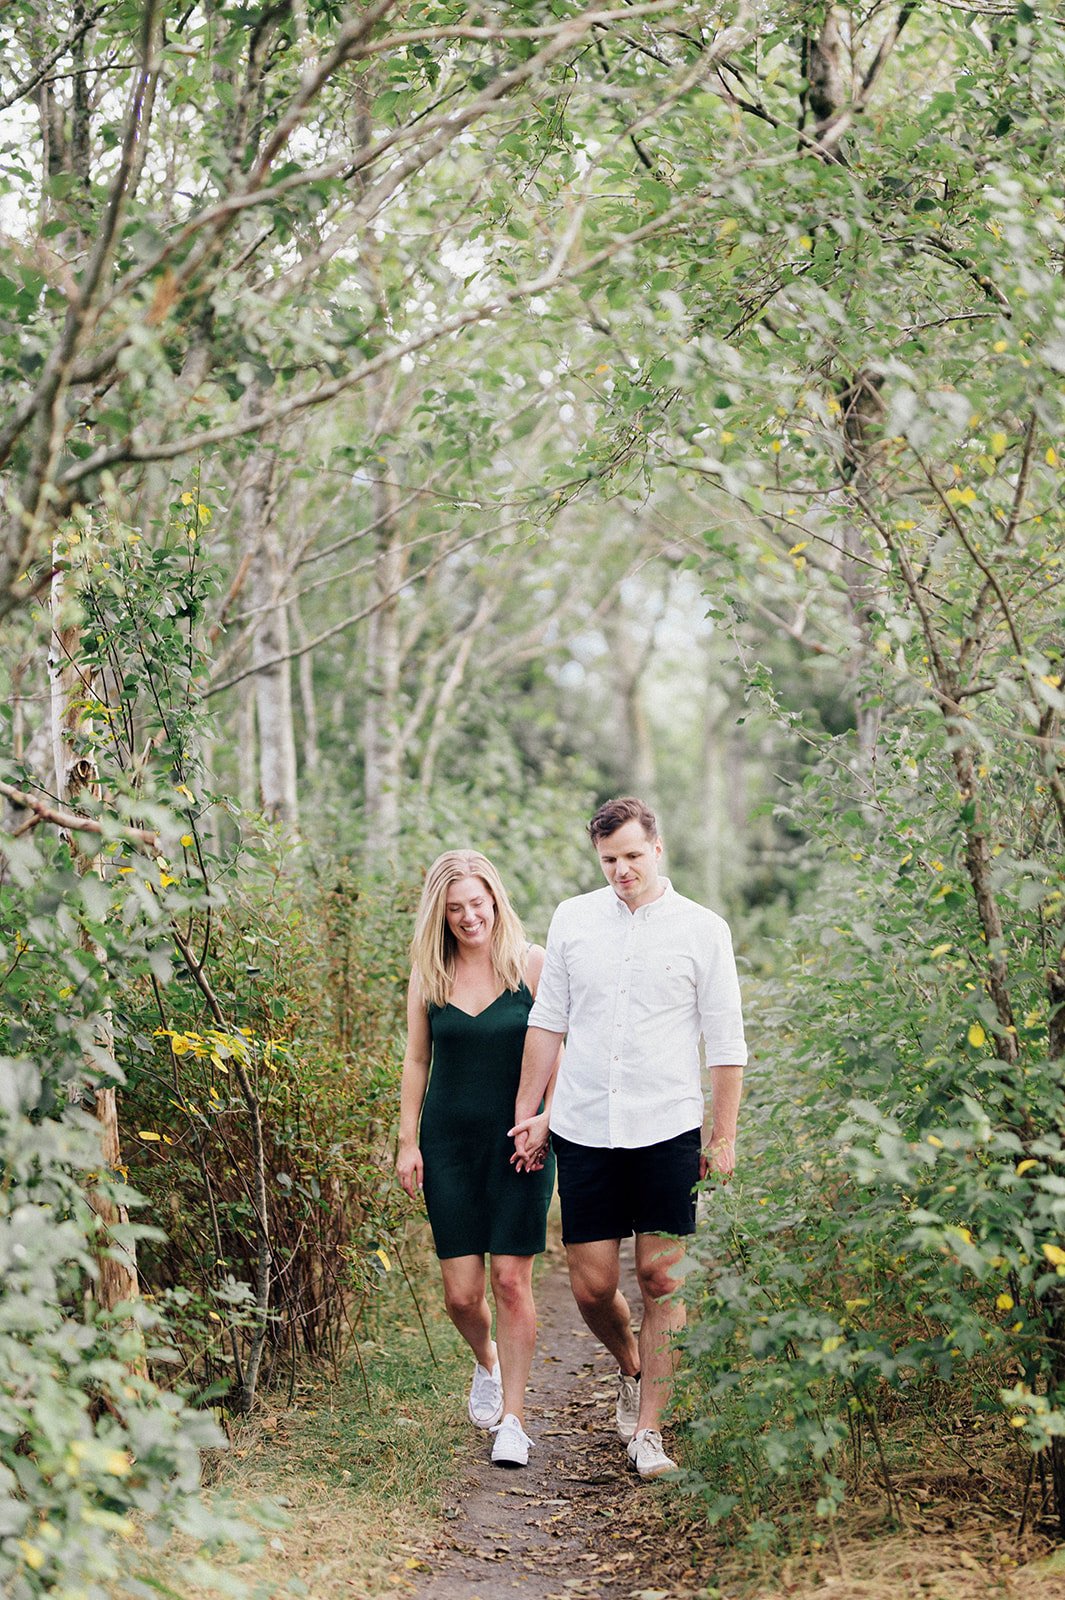 A young man and woman walk though a lightly wooded path in Squamish, BC.